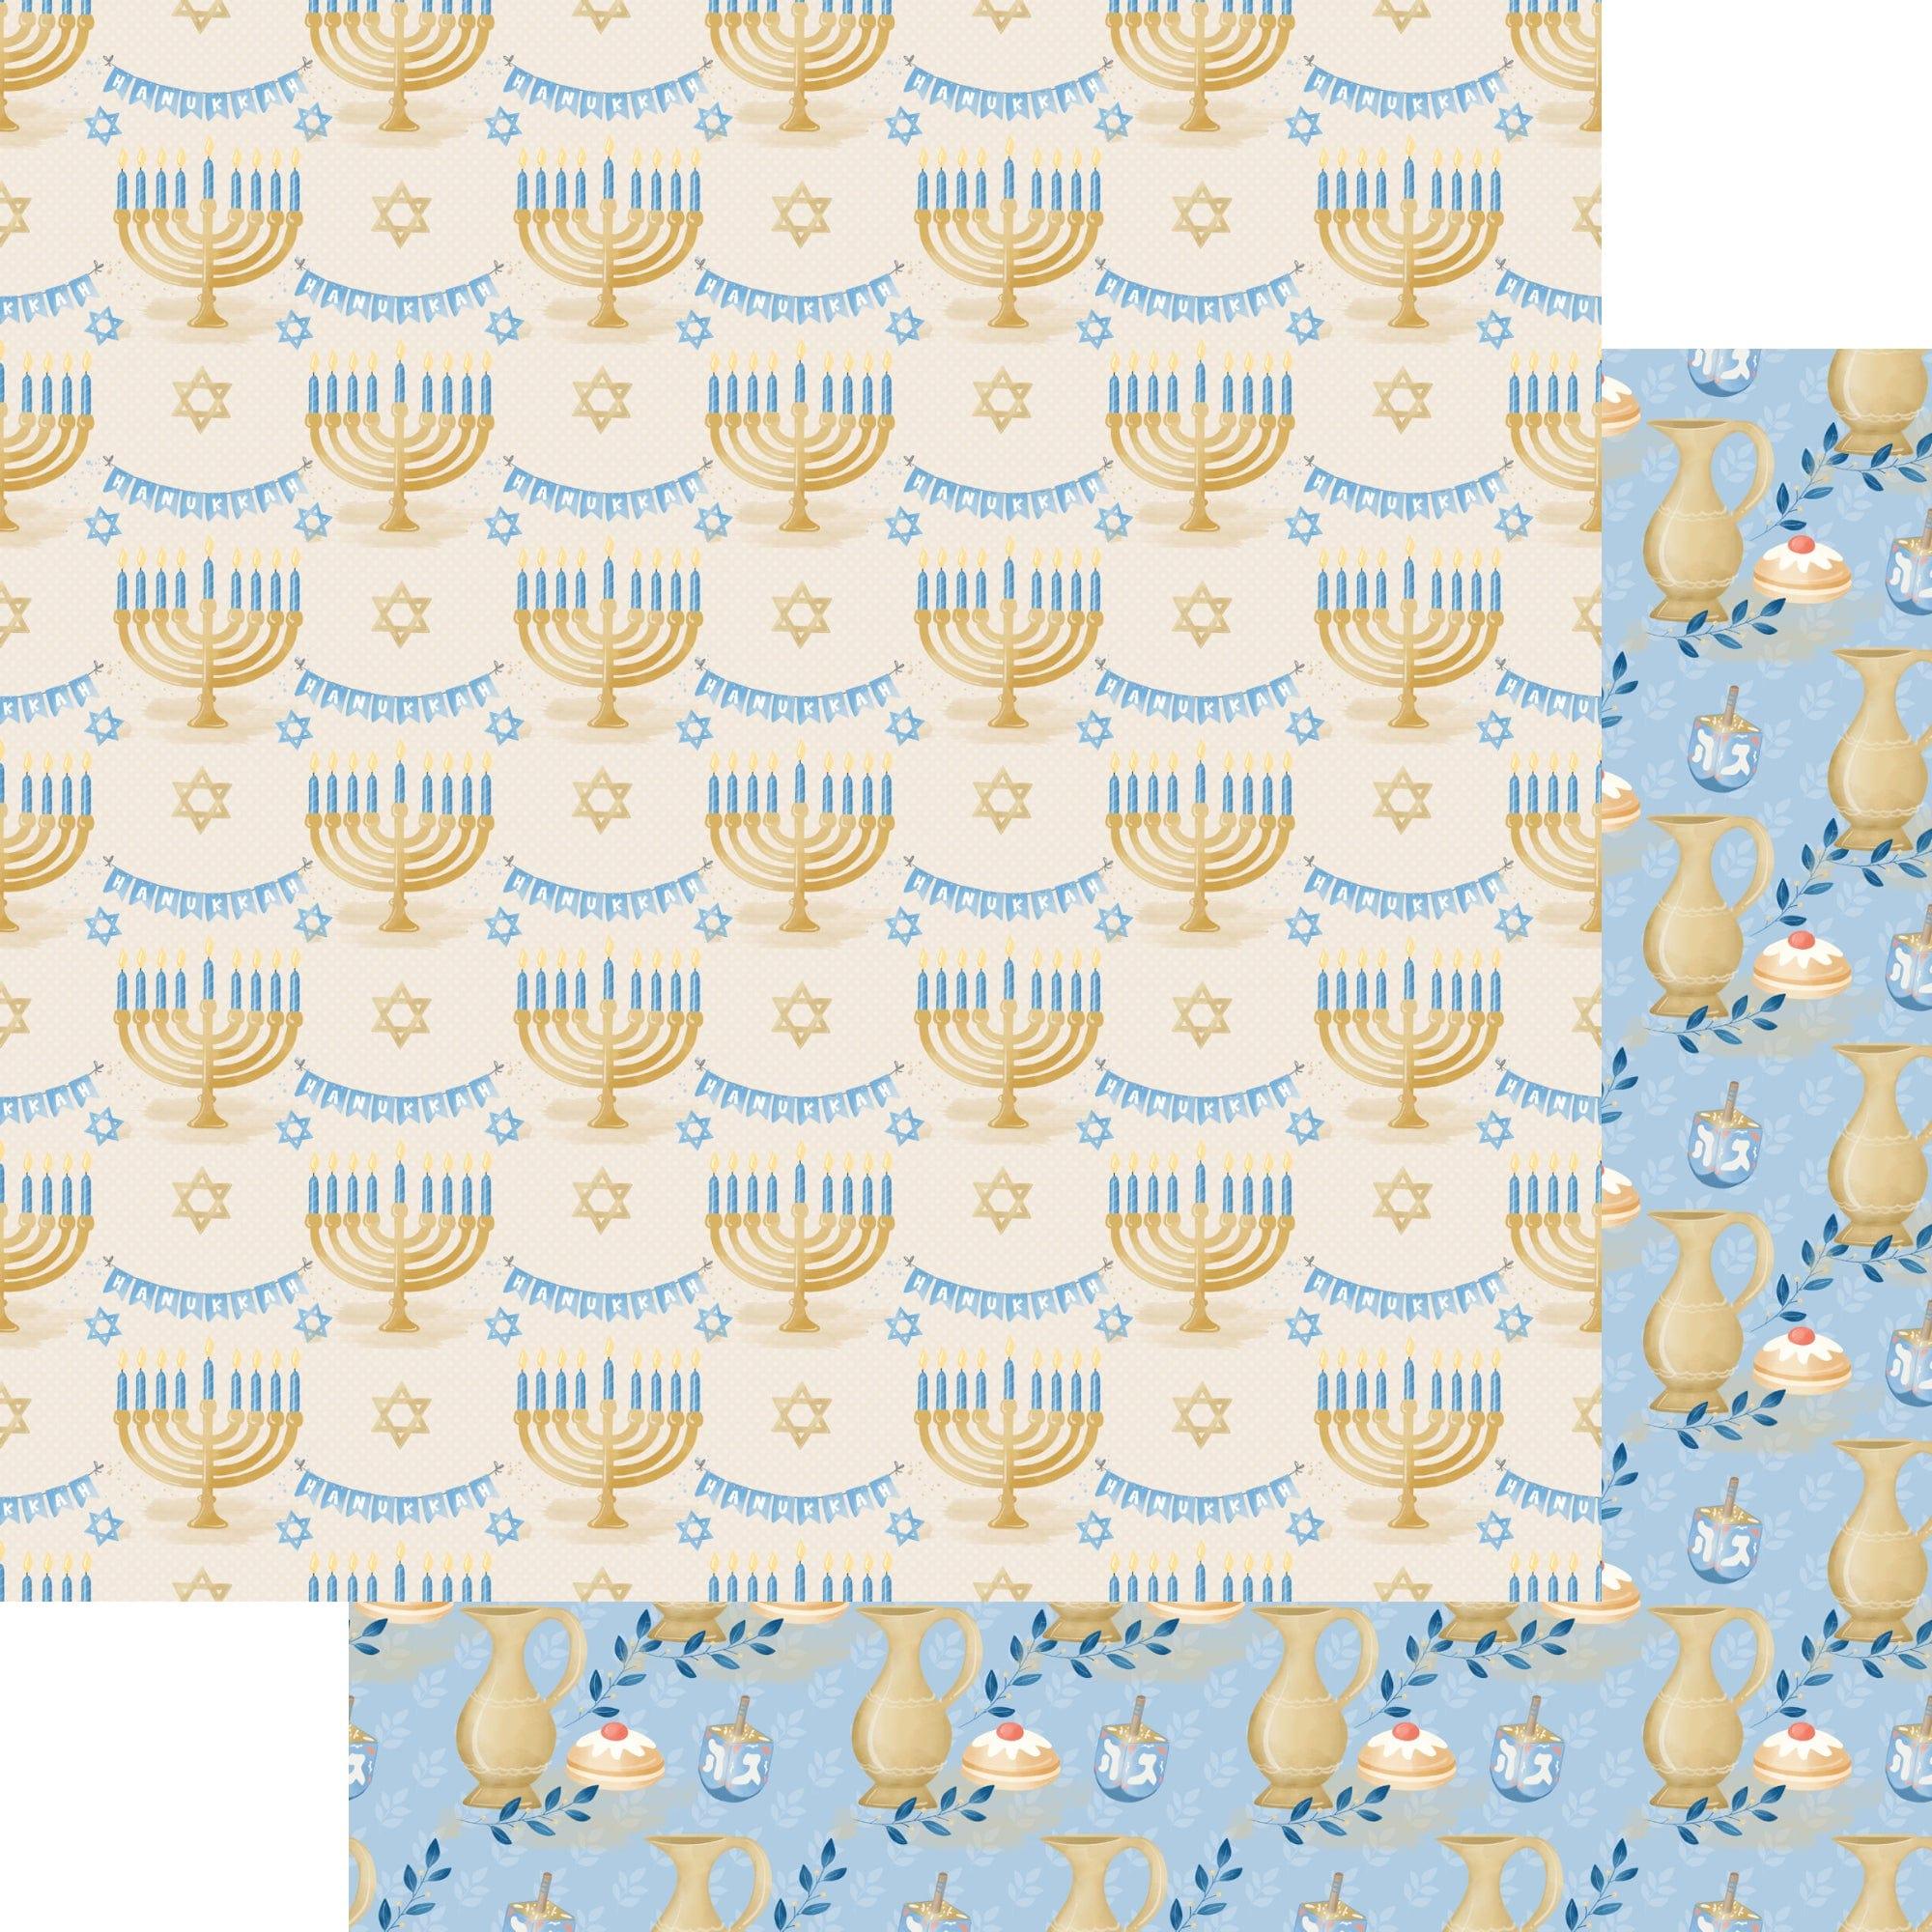 Hanukkah Collection Shine Bright 12 x 12 Double-Sided Scrapbook Paper by SSC Designs - Scrapbook Supply Companies